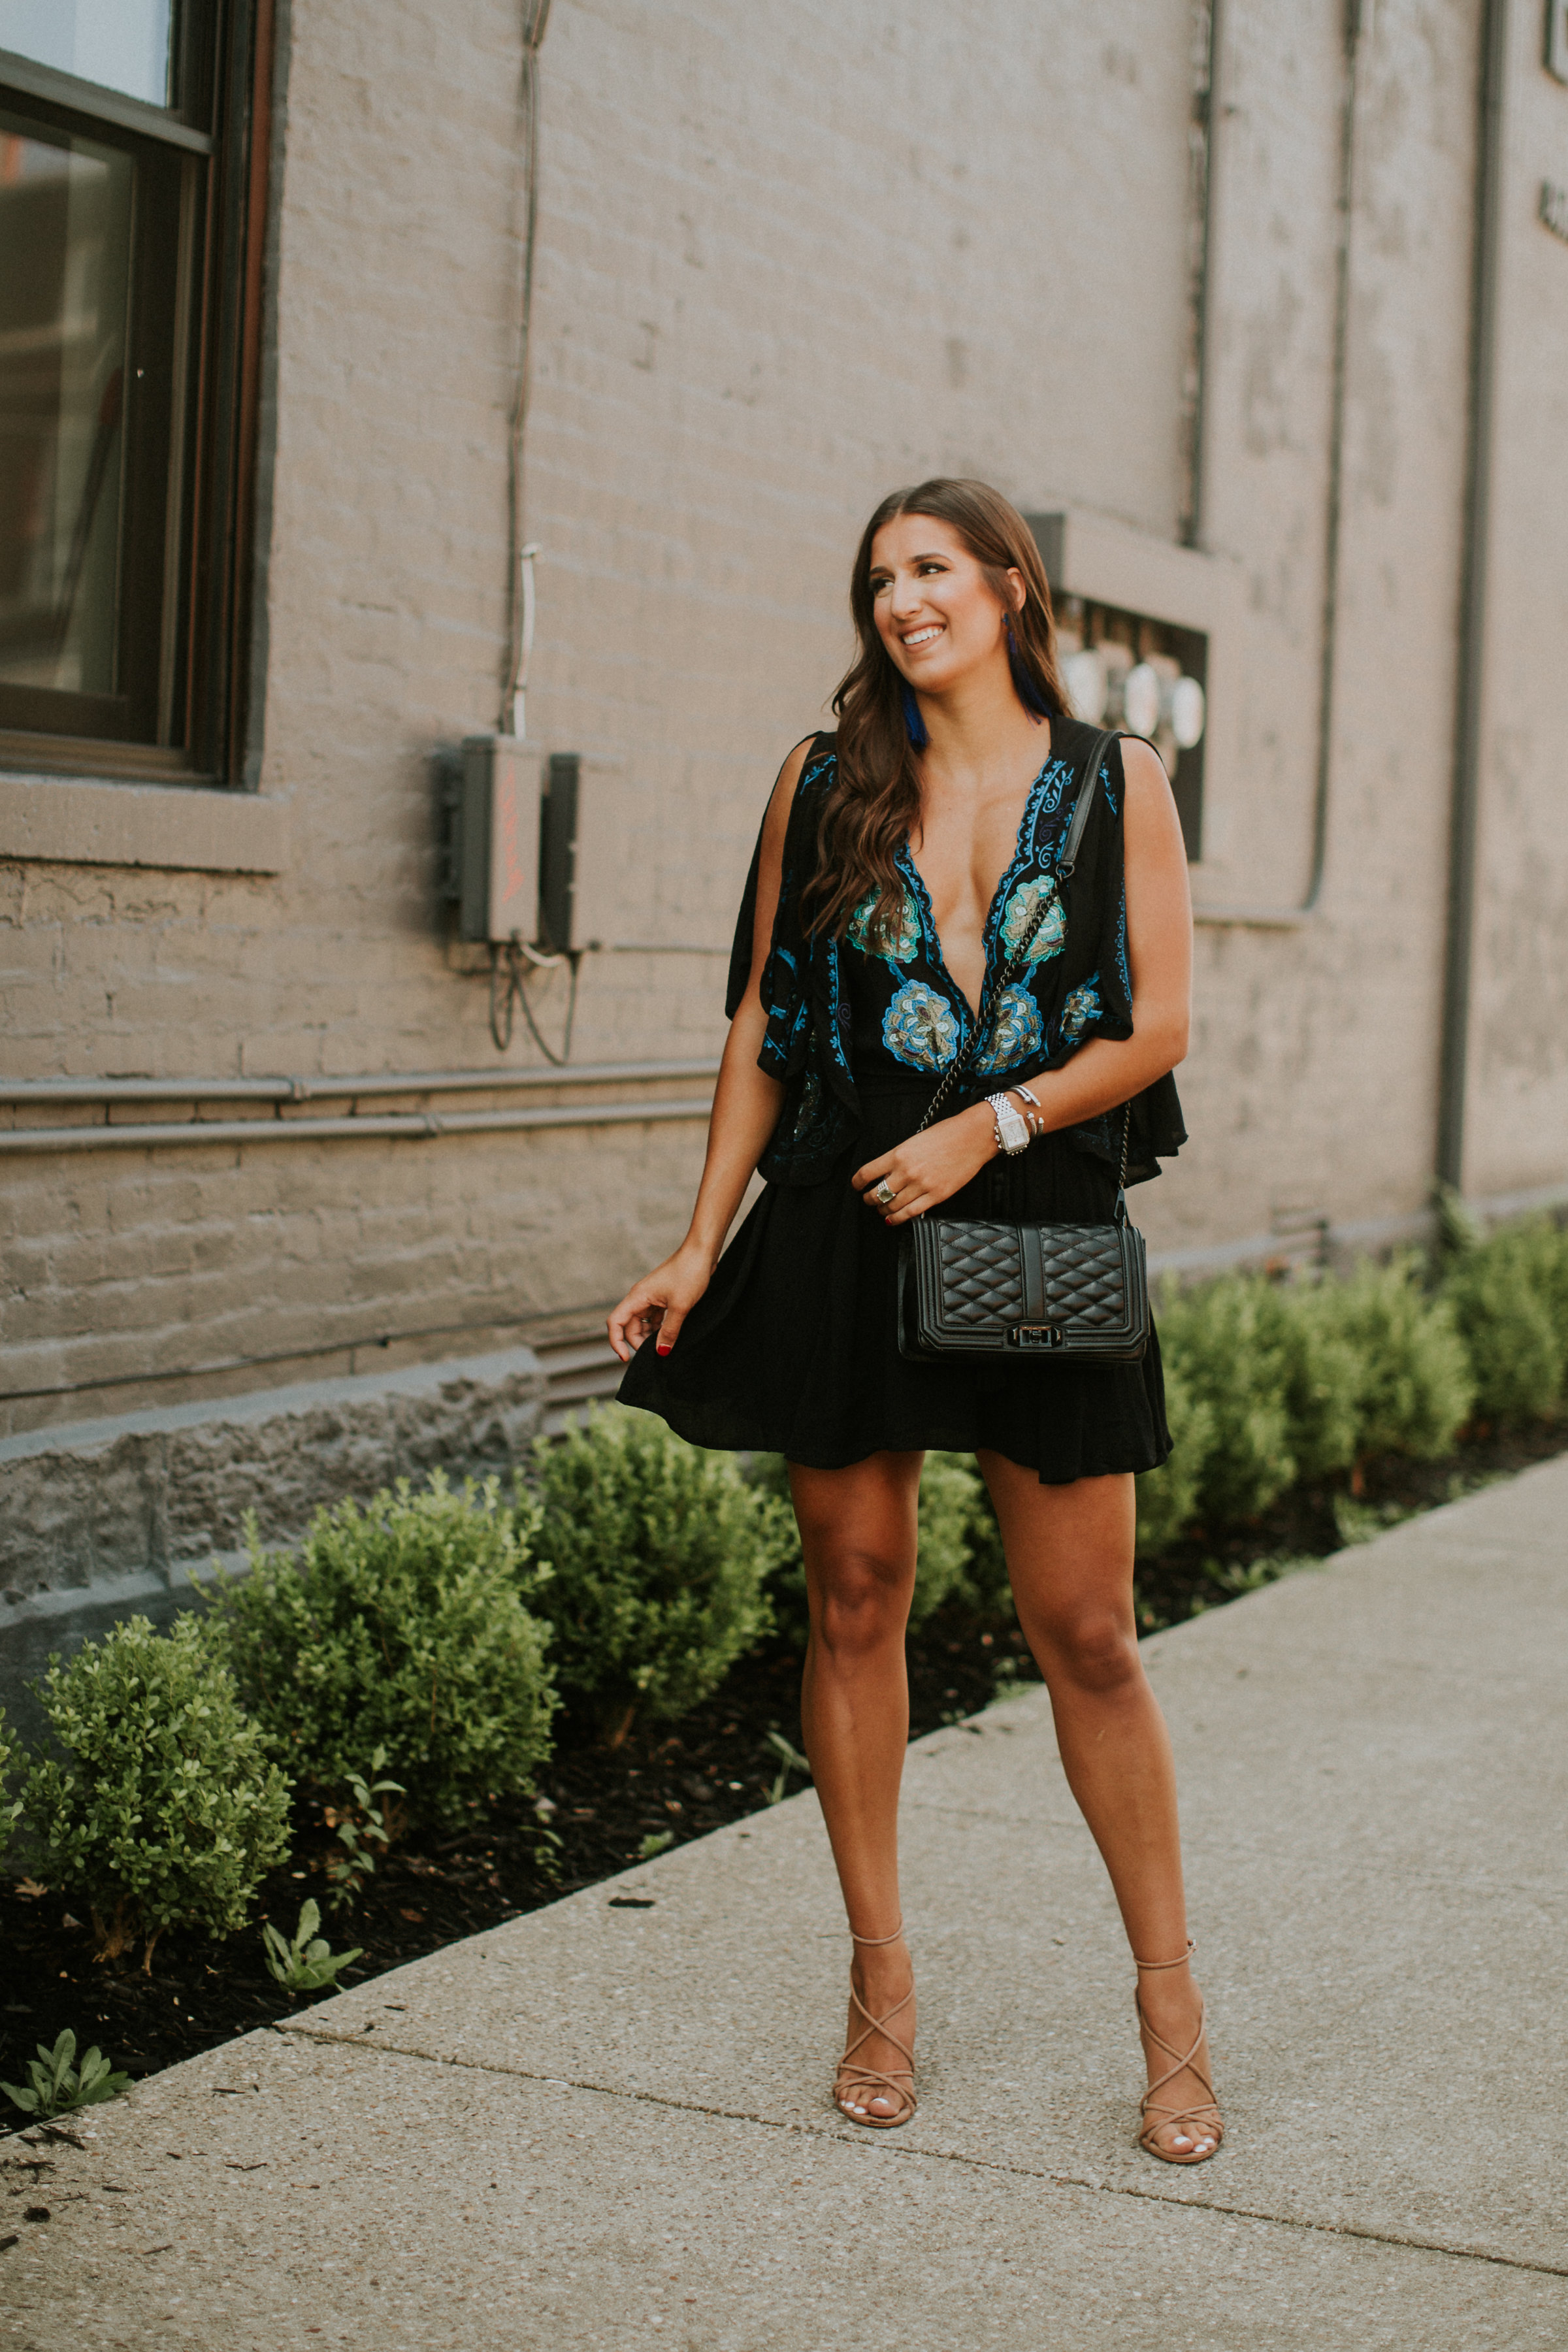 embroidered mini dress, free people mini dress, rebecca minkoff love crossbody bag, rebecca minkoff quilted bag, baublebar tassel earrings, nordstrom outfit, steve madden strappy sandals, tassel earrings, tassel statement earrings, strappy nude sandals // grace wainwright a southern drawl